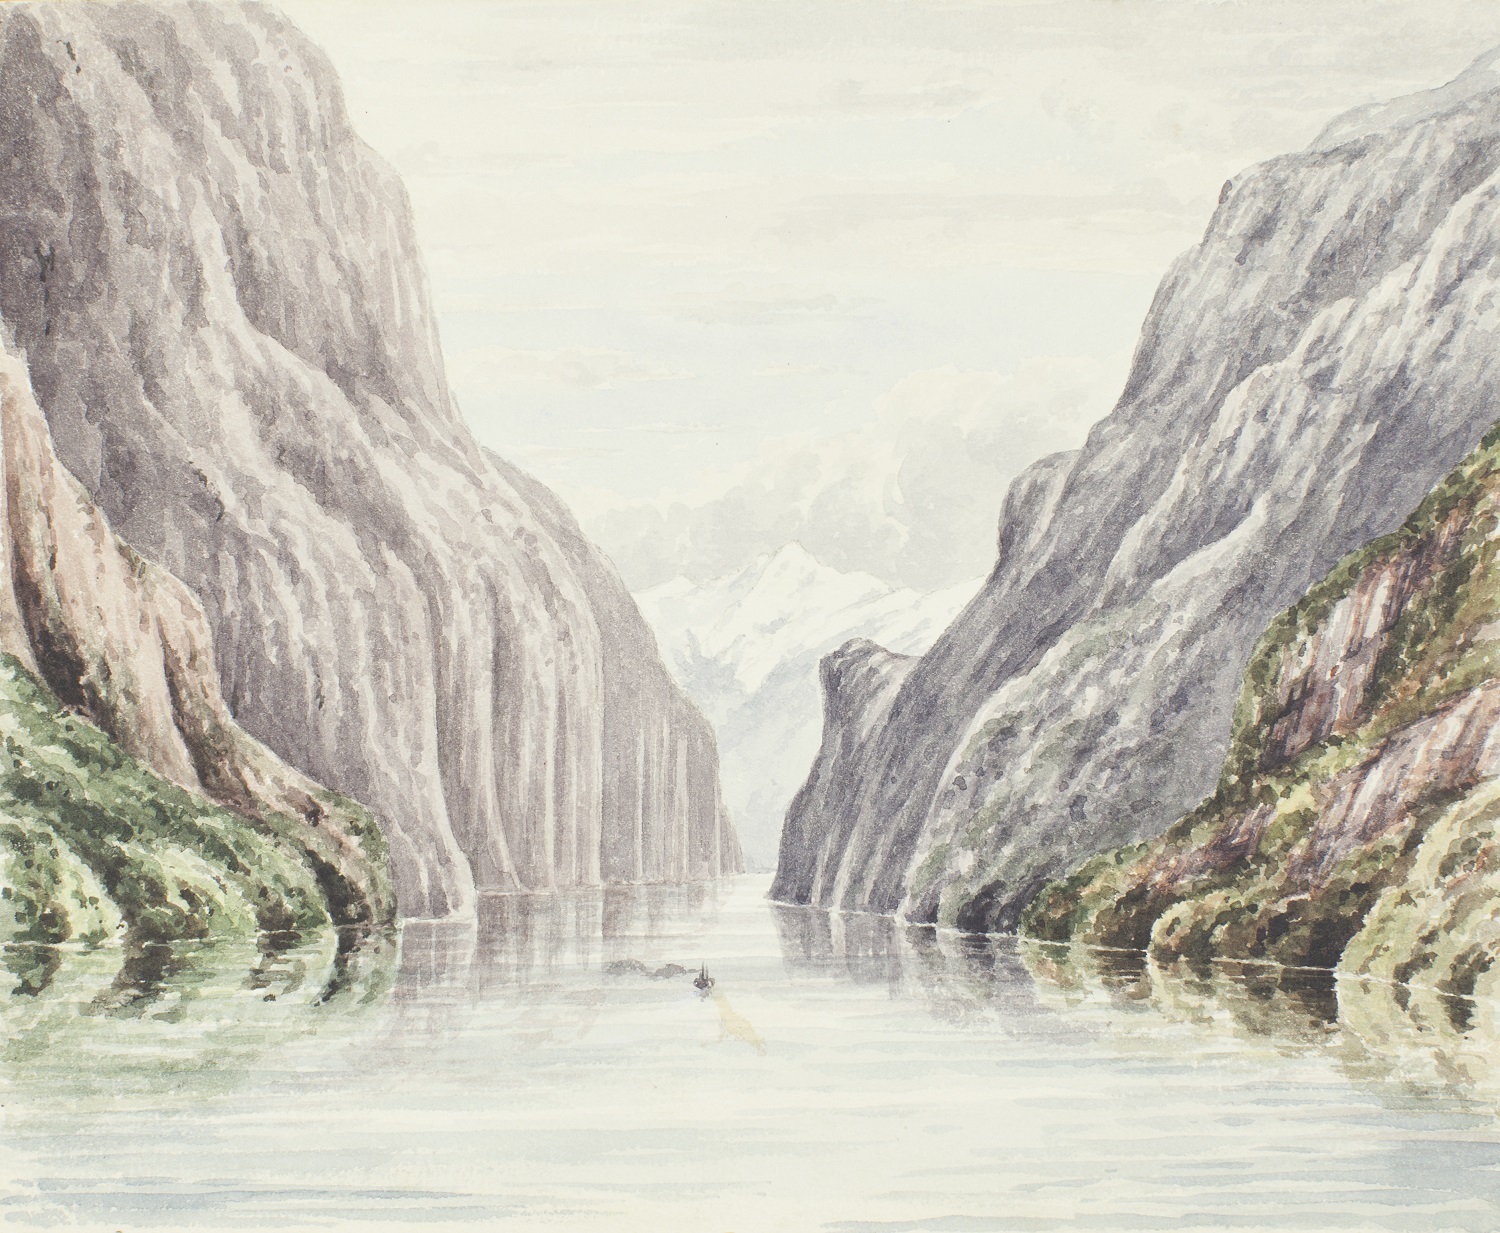 Milford Sound by Charles Enys, Canterbury Museum 1957.26.4